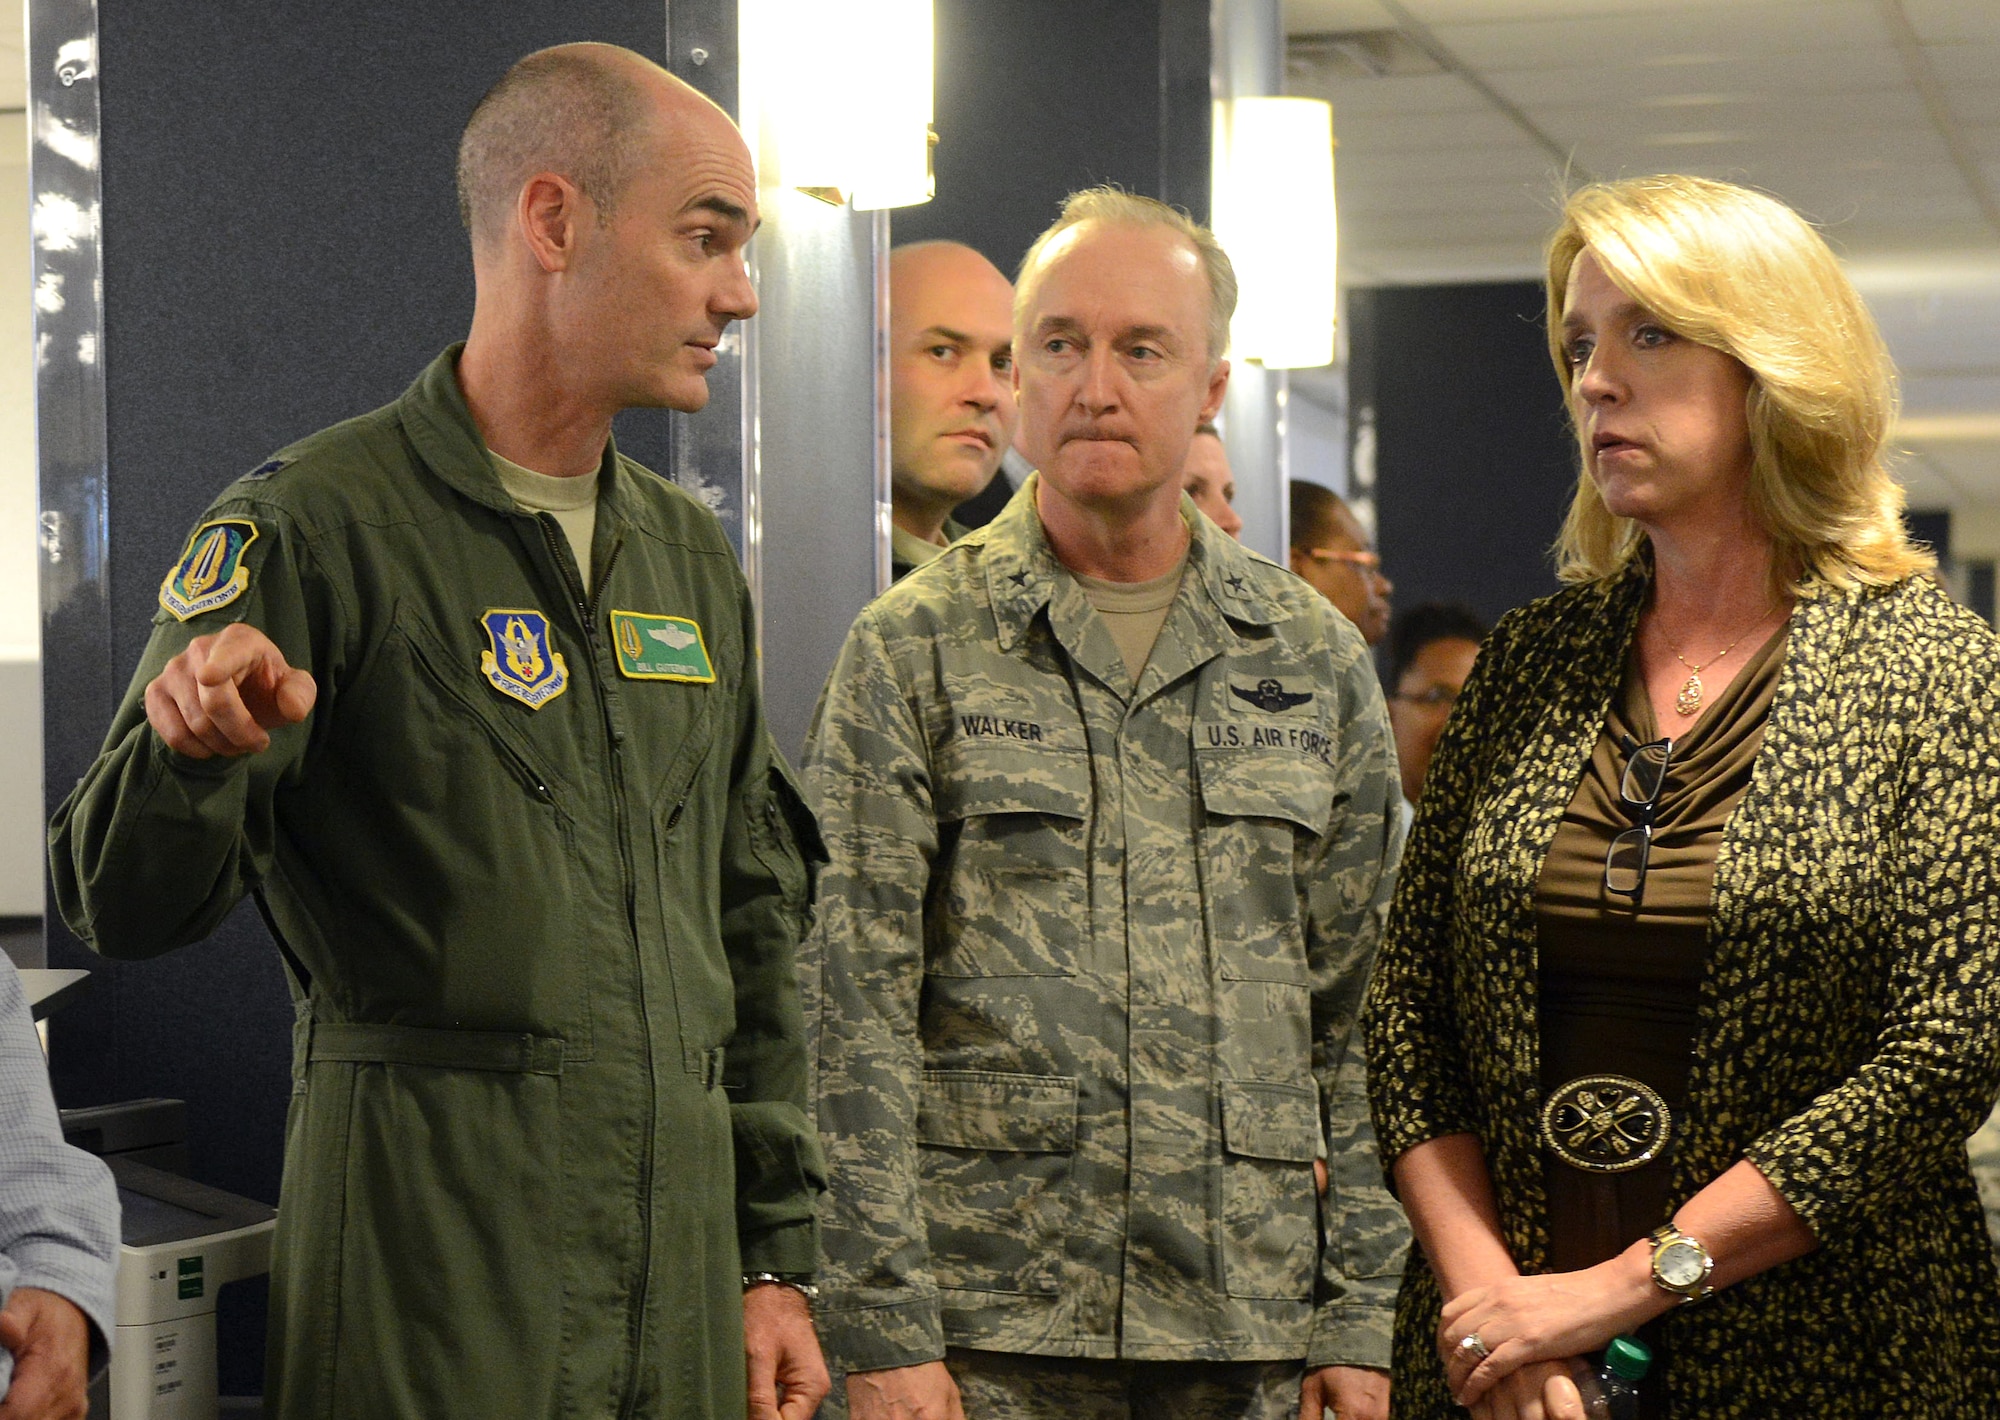 Lt. Col. Bill Gutermuth, left, briefs Secretary of the Air Force Deborah Lee James as Brig. Gen. Edmund D. Walker listens during her visit to the Force Generation Center Aug. 21, 2014, at Robins Air Force Base, Ga. The center ensures real-time visibility, accountability and long-range planning for reserve forces which provides reservists greater predictability in their deployment schedules. Gutermuth is with the Air Force Reserve Command and Walker is the commander of Force Generation Center, Headquarters AFRC. (U.S. Air Force photo/Tommie Horton)